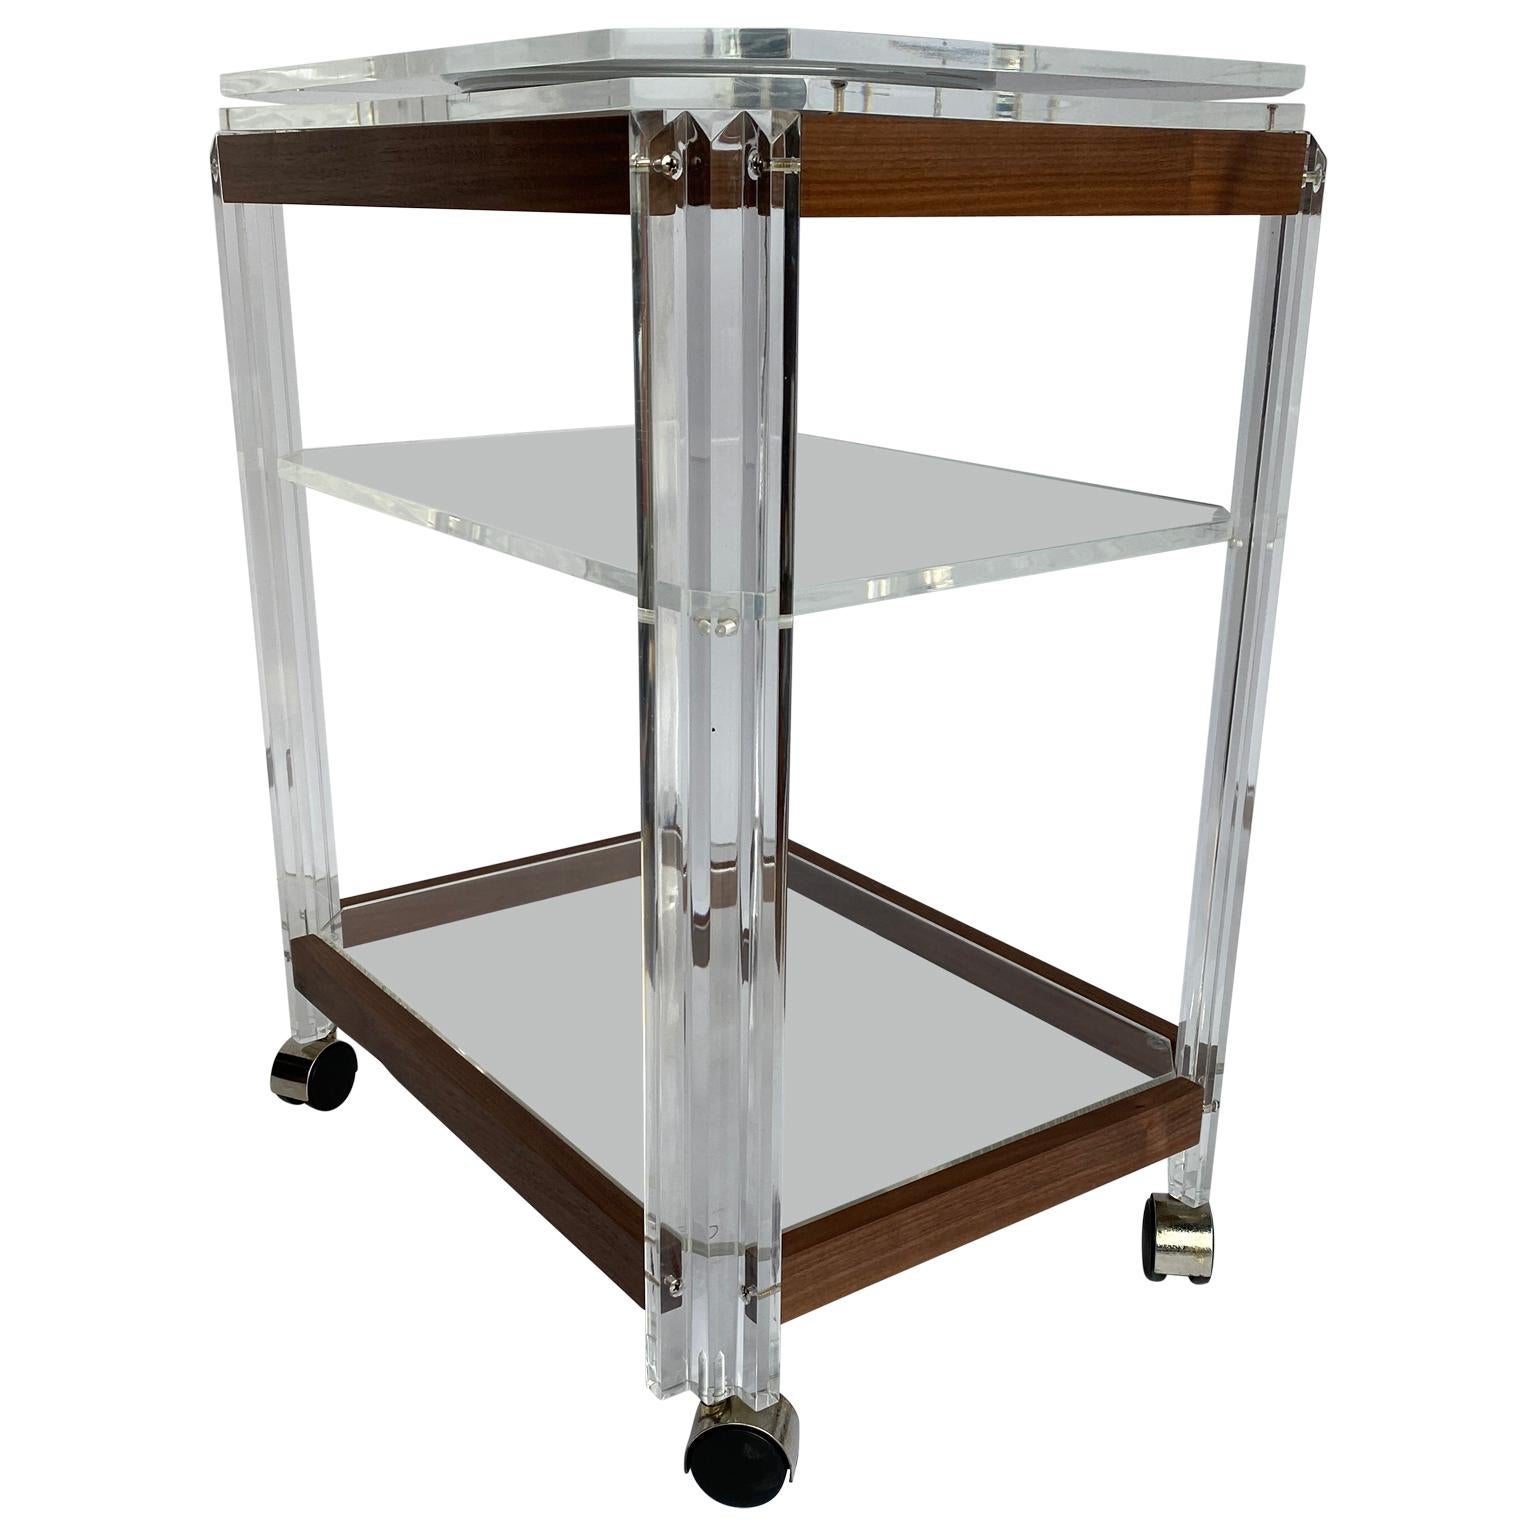 Mid-century three tier lucite and black cherry wood bar cart trolley.